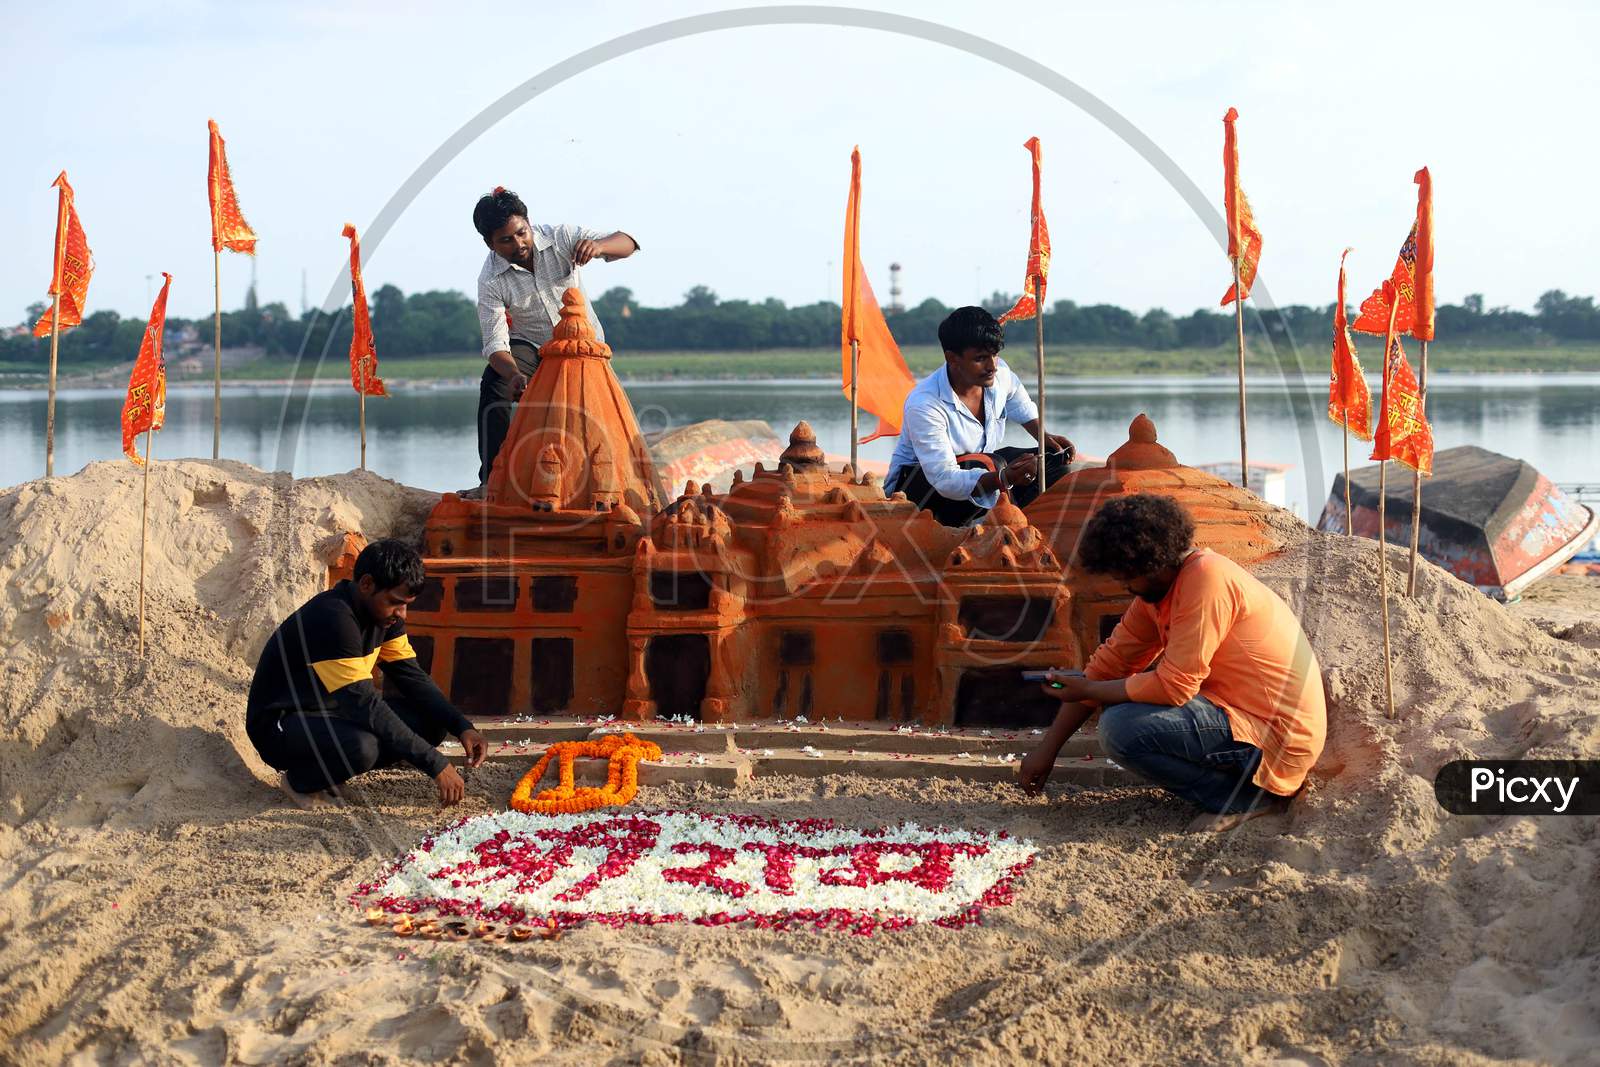 Allahabad Central University students built a sand sculpture of Ram Temple, ahead of the foundation ceremony of Ram temple in Ayodhya, on the banks of River Ganga at Sangam, in Prayagraj, August 4, 2020.